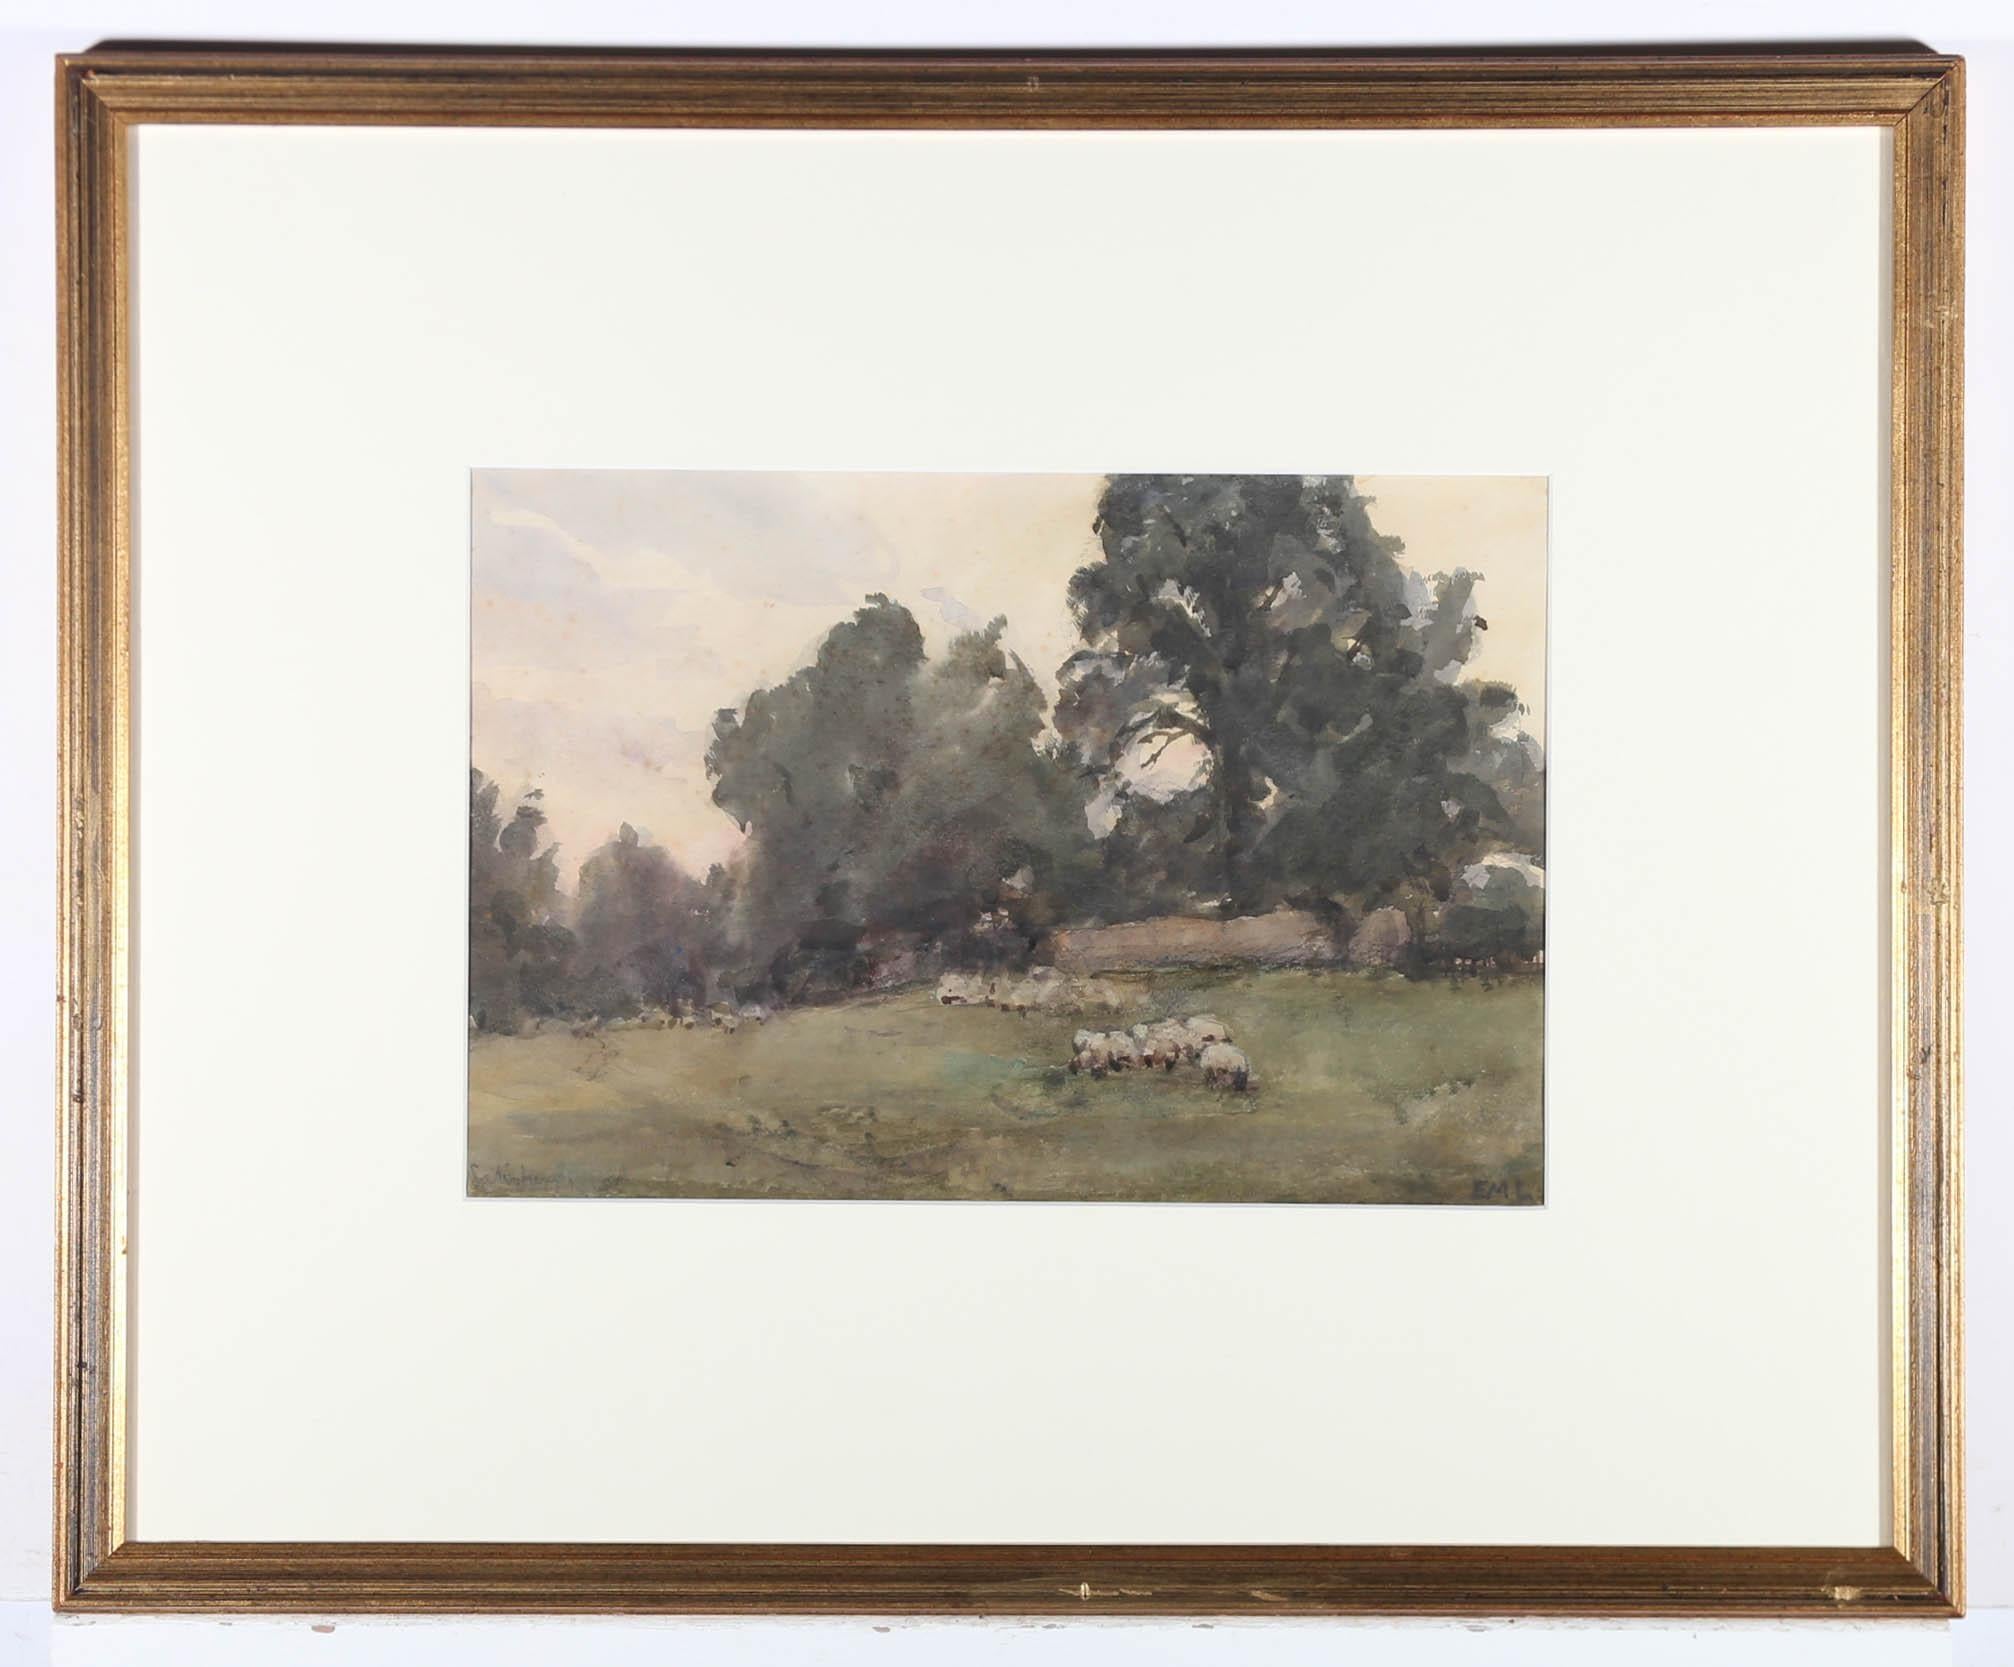 A fine late 19th century watercolour depicting a flock of Suffolk sheep grazing in a tree lined landscape. The artist has captured the scene in a soft impressionistic style, delicately painted in a select palette of colours. Signed with initials to